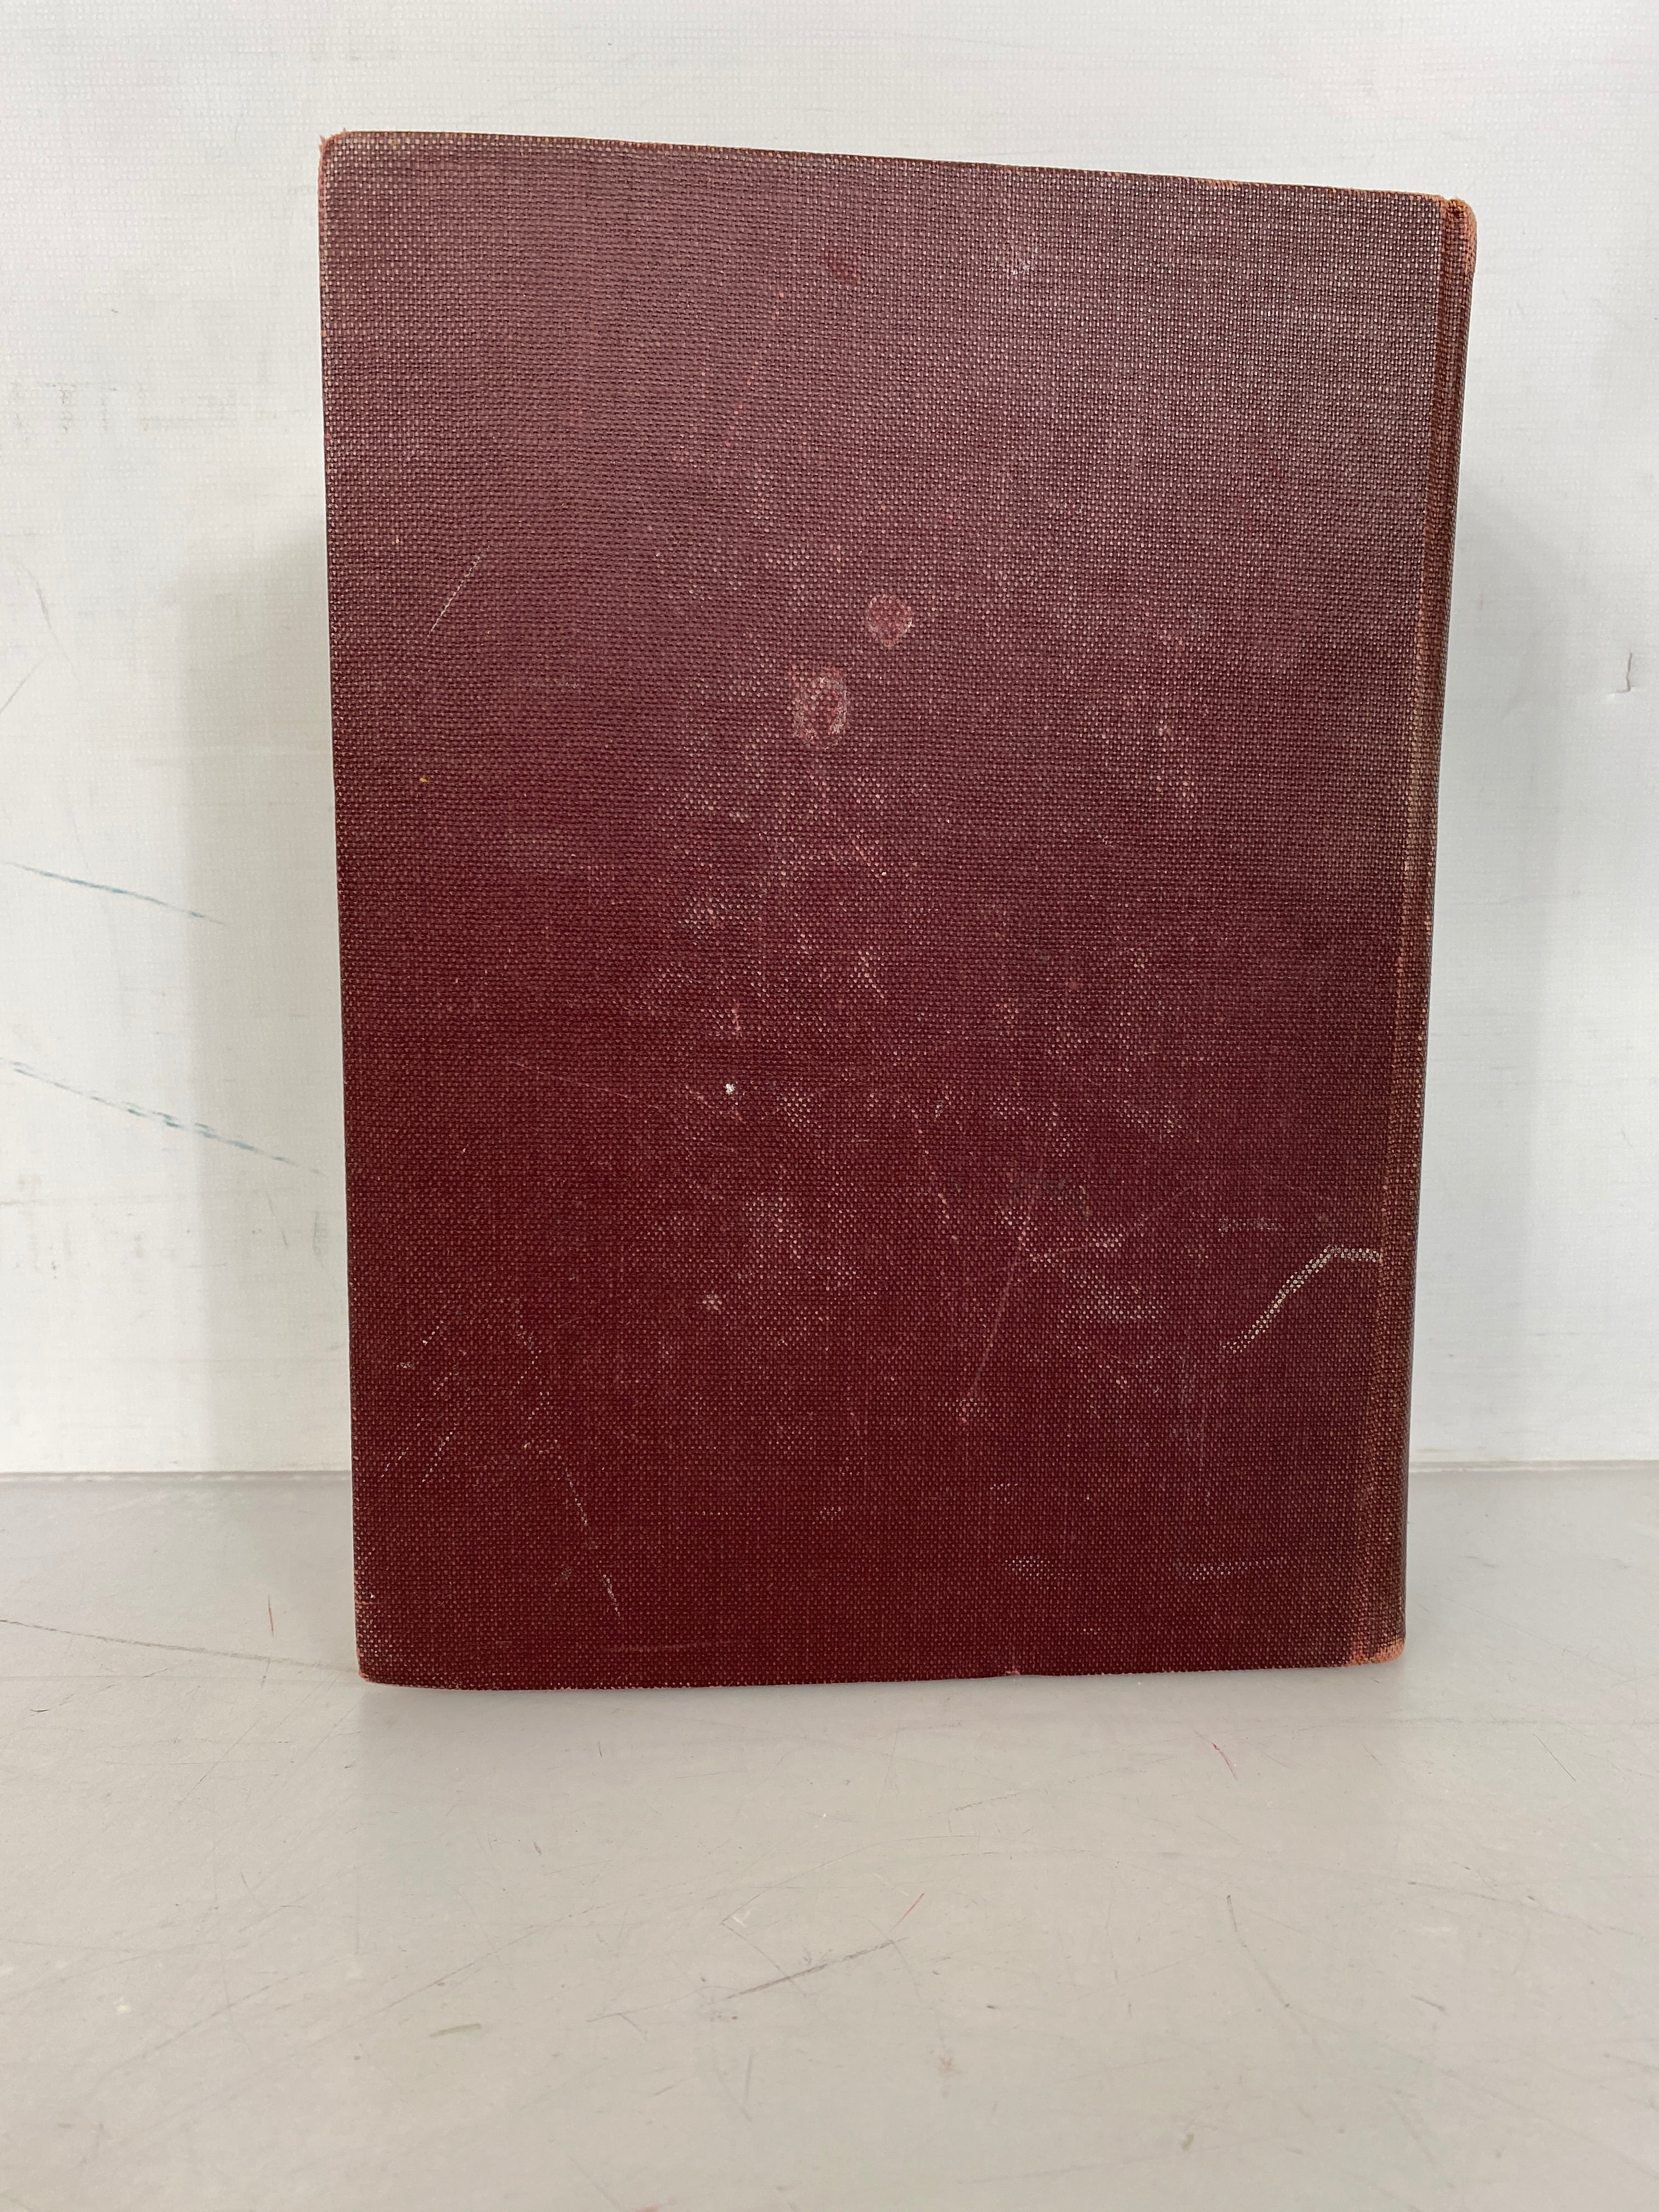 The Complete Works of William Shakespeare William Wright 1944 HC